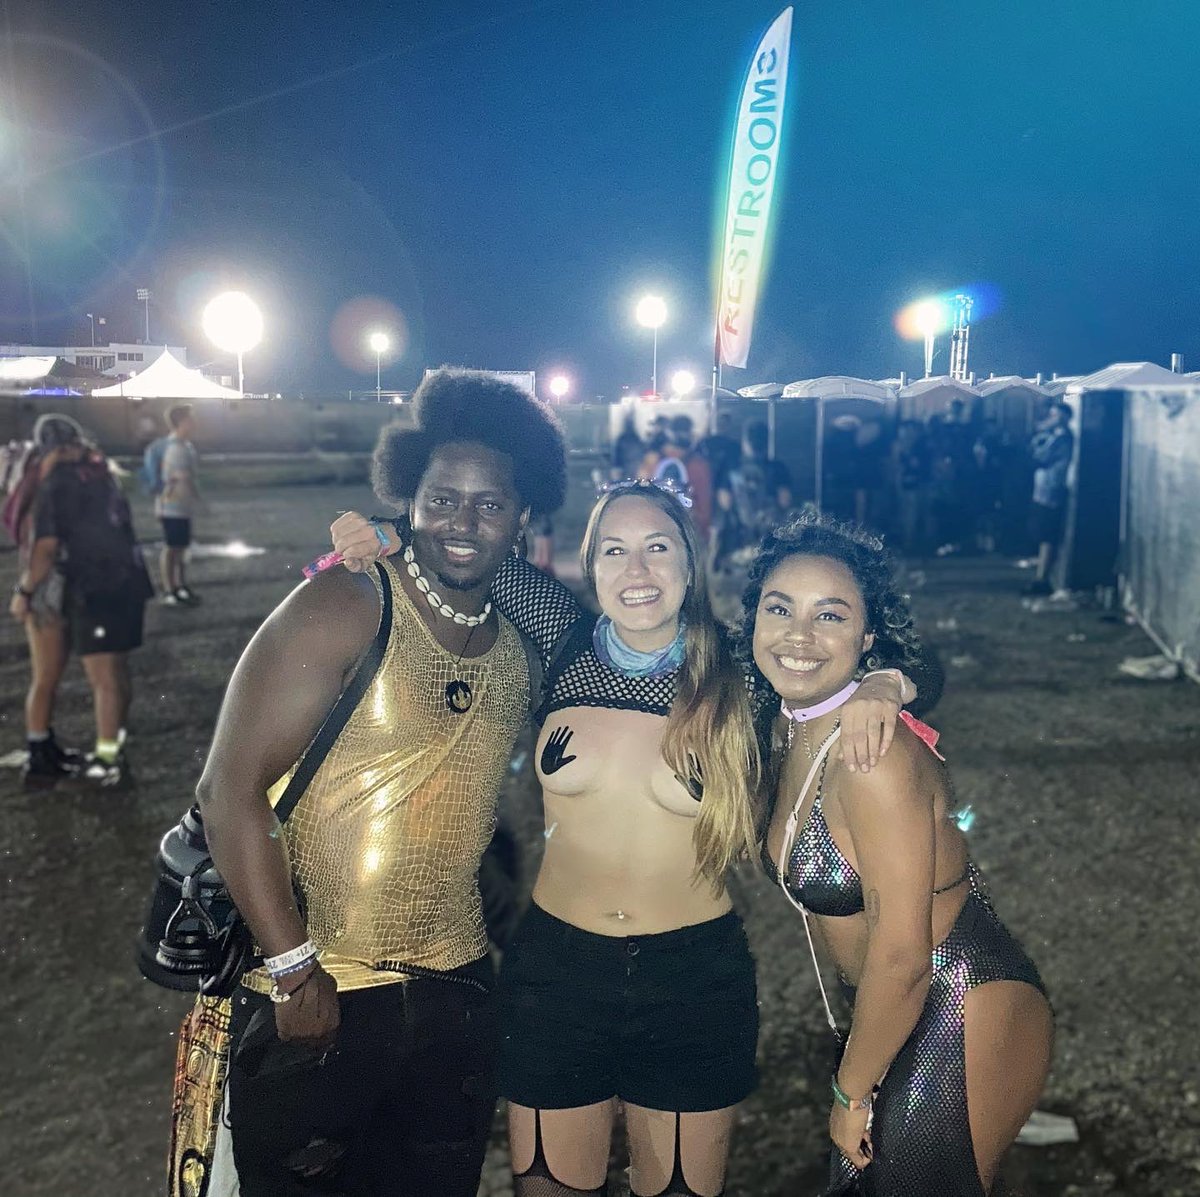 Our family spent an amazing weekend at  @UbbidubbiFest and getting to see our artists  @KgtoKai close the festival yesterday on the Ubbi Dubbi World Stage was an incredible feeling  Thanks  @DDPWorldwide for a great weekend! 